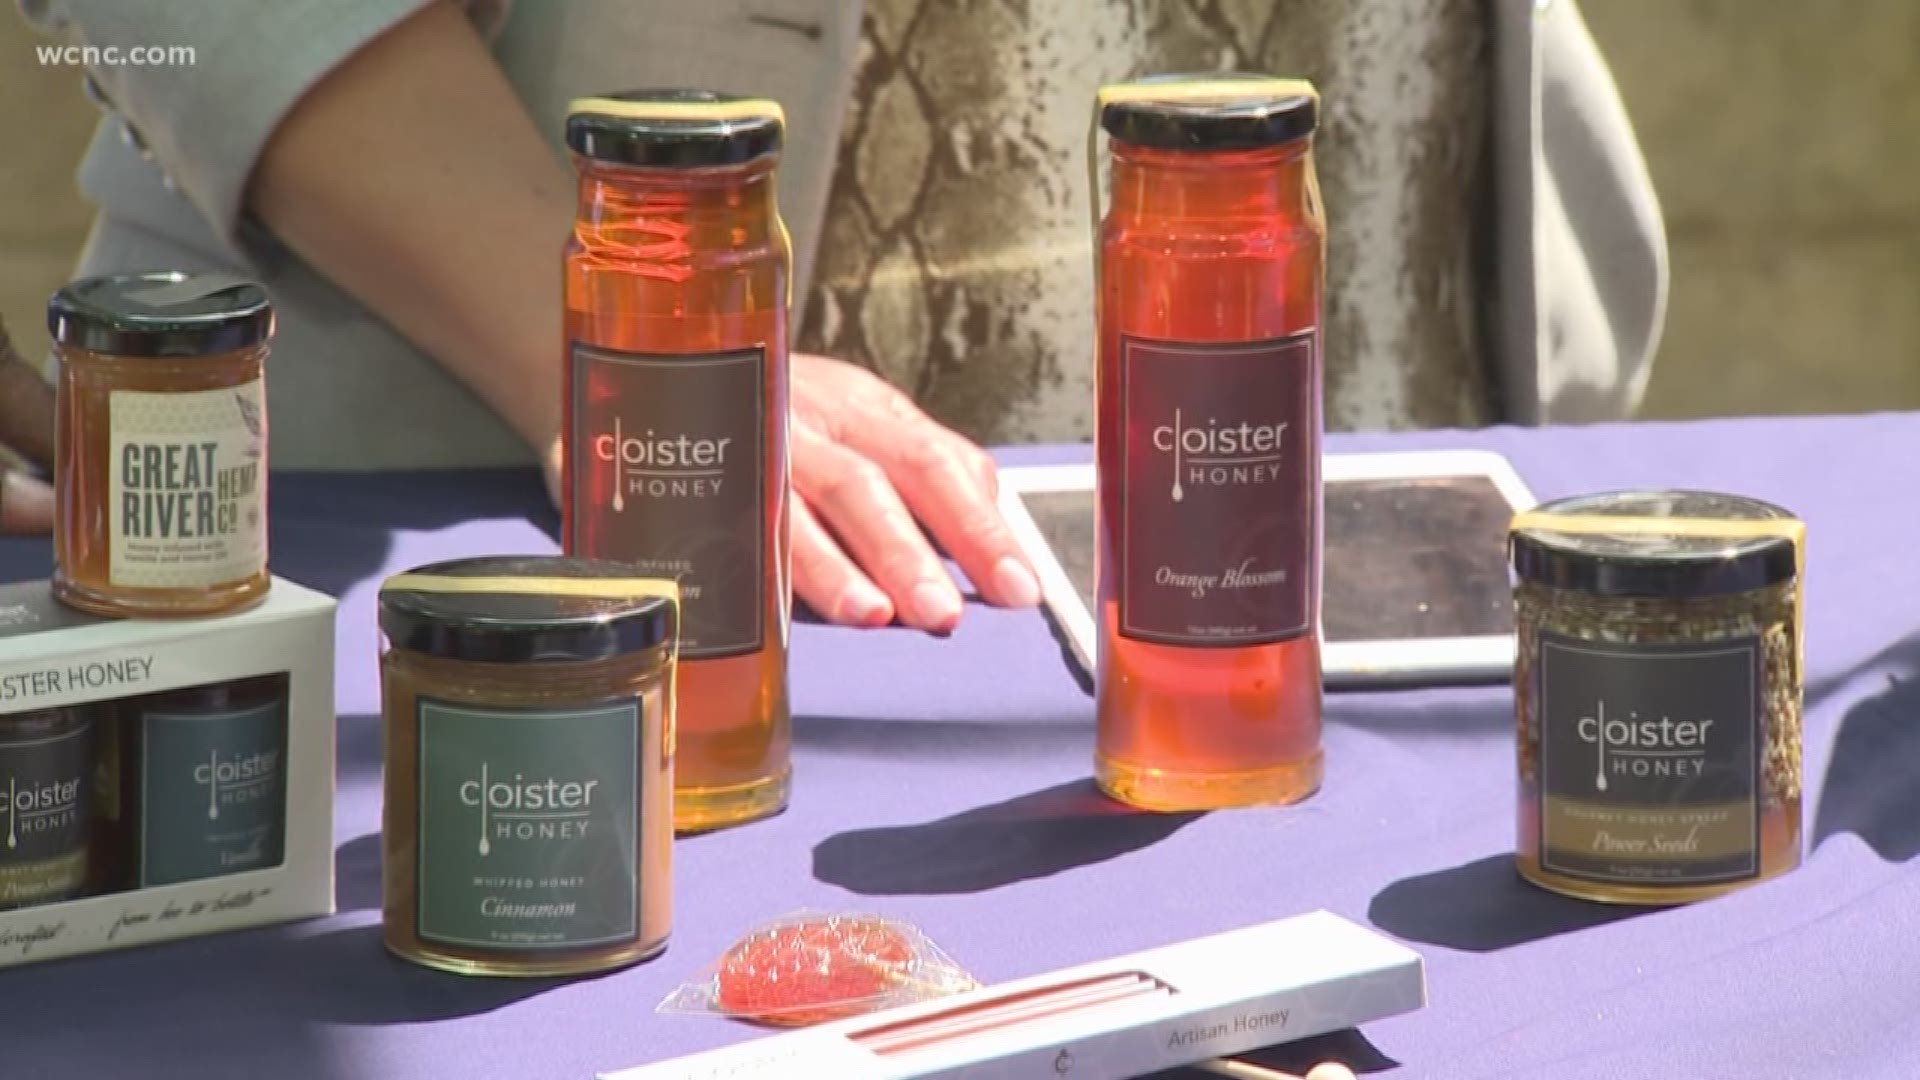 Charlotte beekeeper and owner of Cloister Honey, Randall York, shares what it’s like to be a beekeeper and why we should buy local honey.